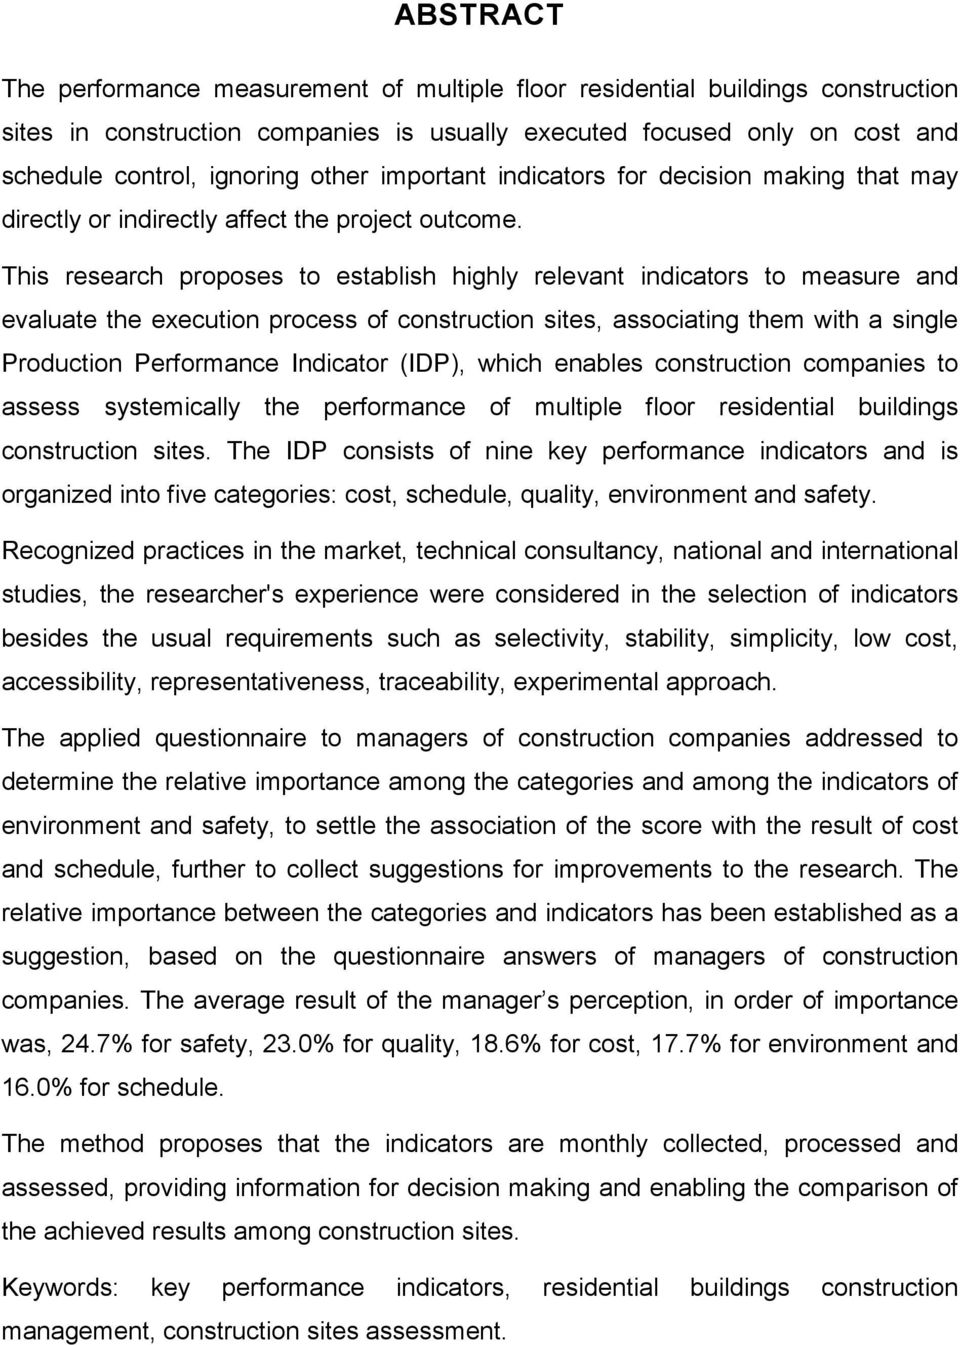 This research proposes to establish highly relevant indicators to measure and evaluate the execution process of construction sites, associating them with a single Production Performance Indicator